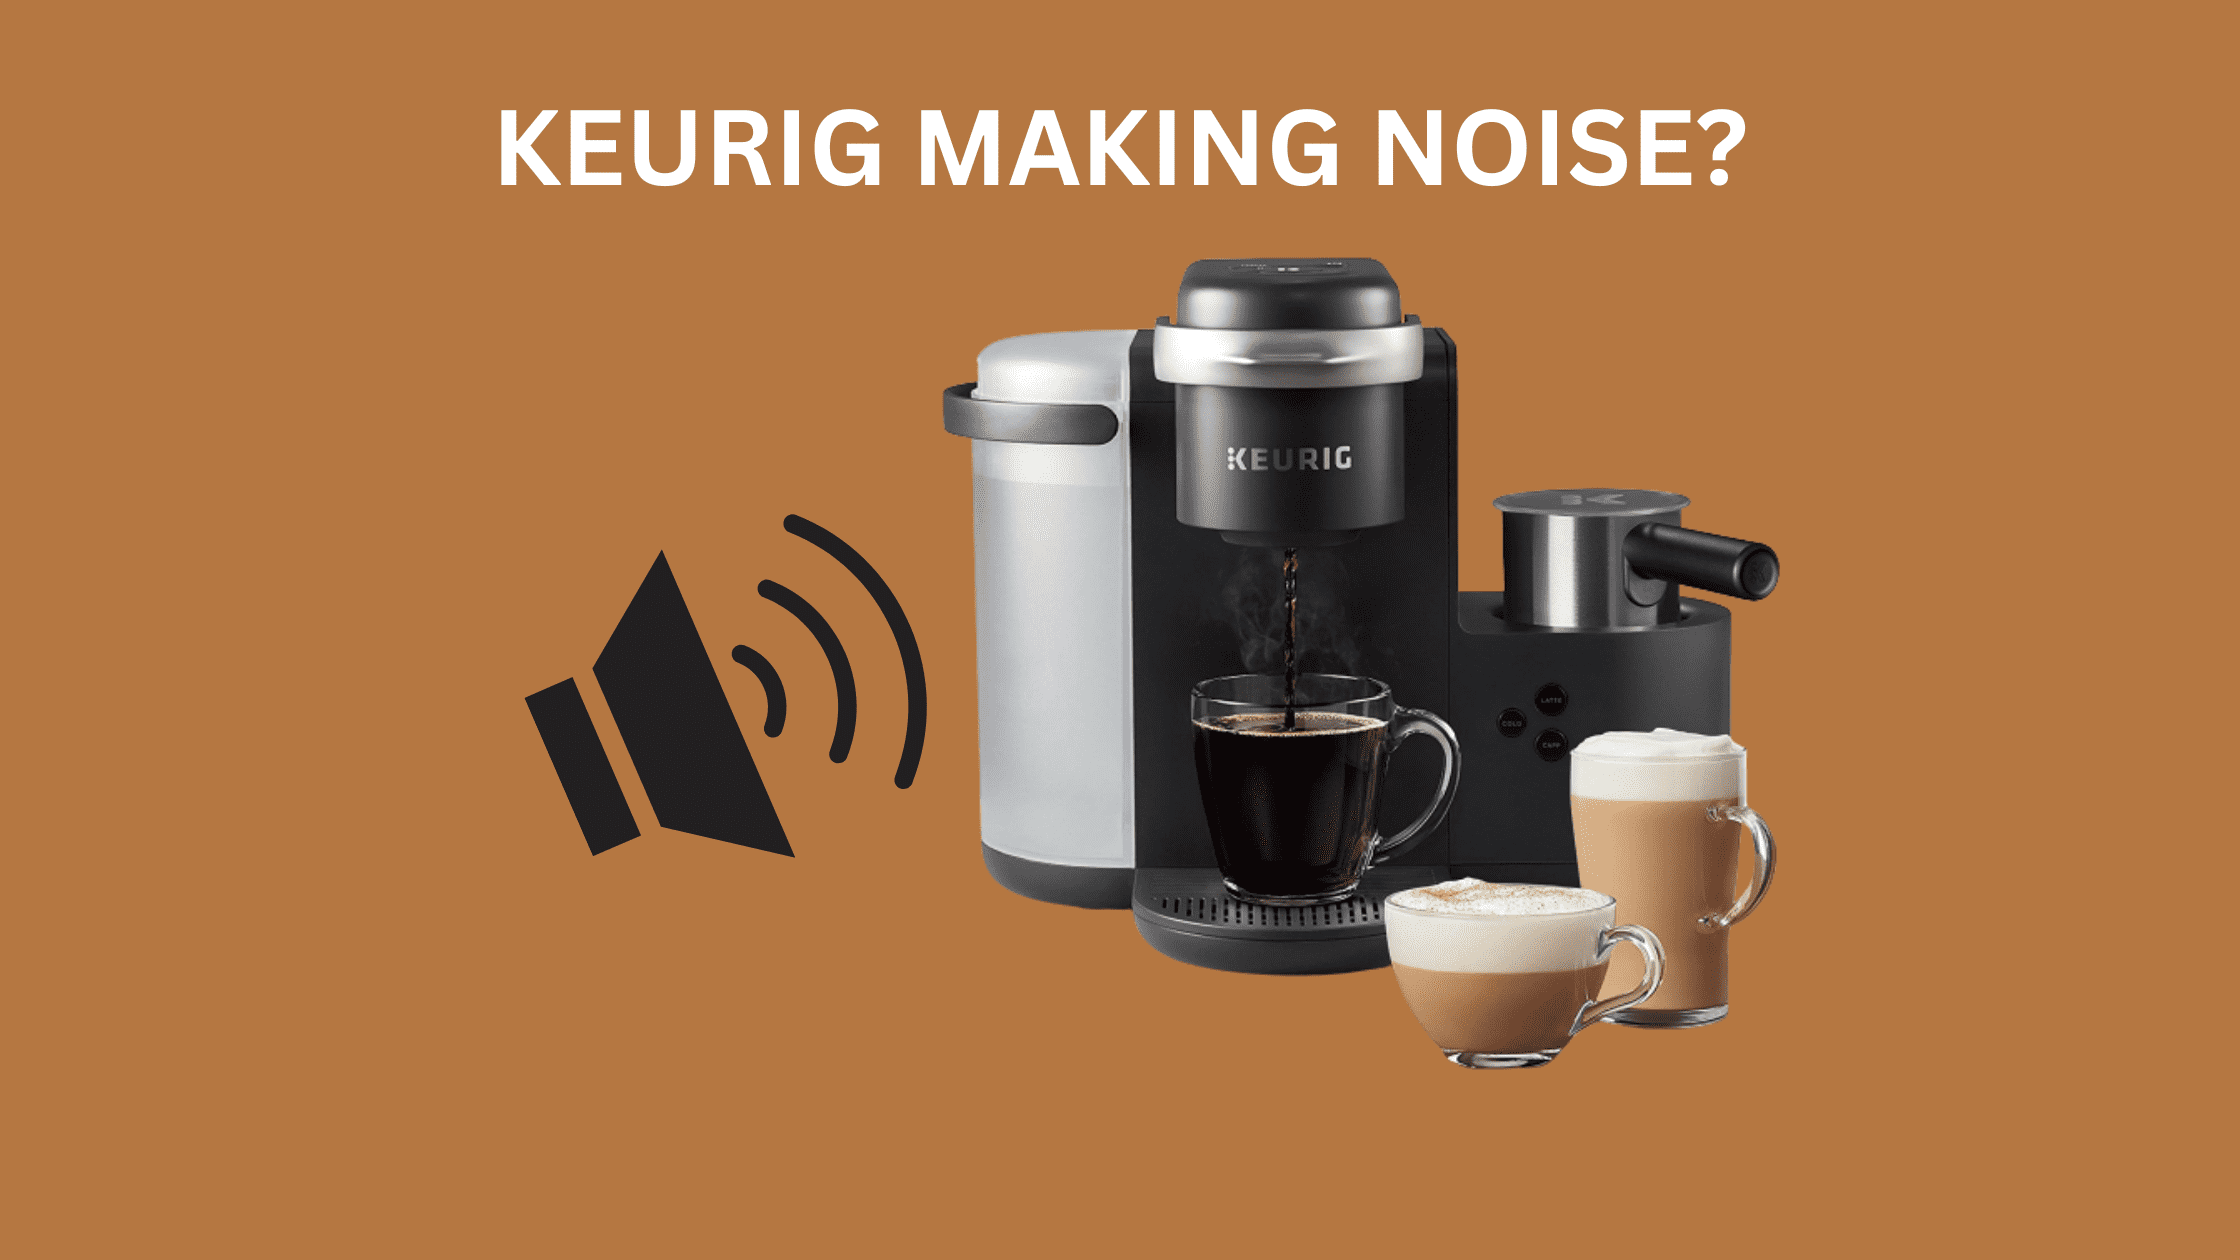 Why Is Your Keurig Making Noise? Troubleshooting Guide